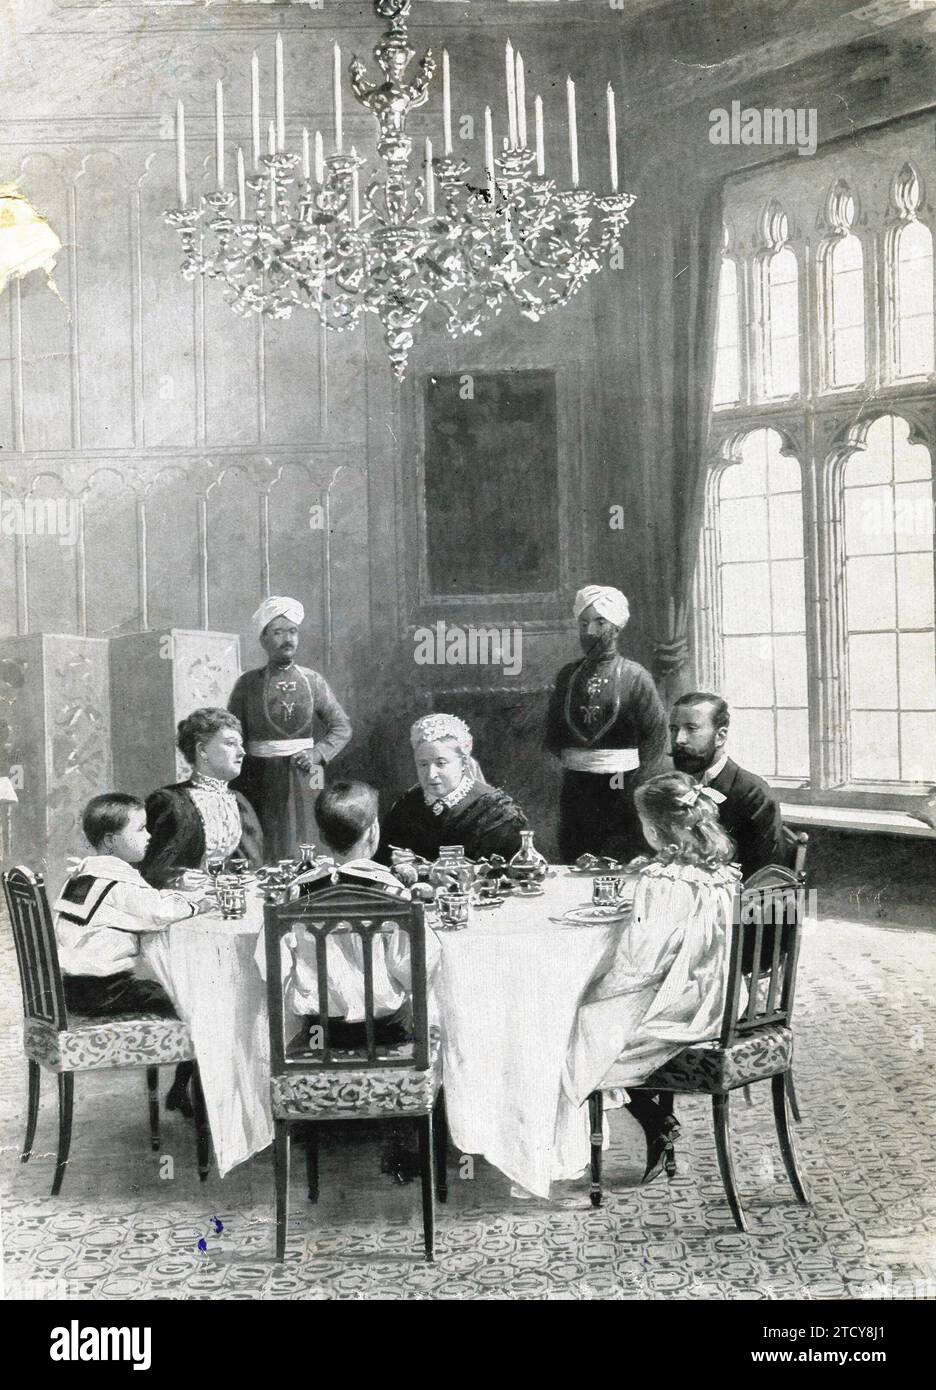 01/01/1870. The image reproduces a meal at Windsor Castle of the Sovereign with her daughter Beatrice and her son-in-law Henry, Princes of Battenberg, and their children, the Marquis of Carisbrooke, Queen Victoria Eugenie of Spain and Lord Leopold Mountbatten. Credit: Album / Archivo ABC Stock Photo